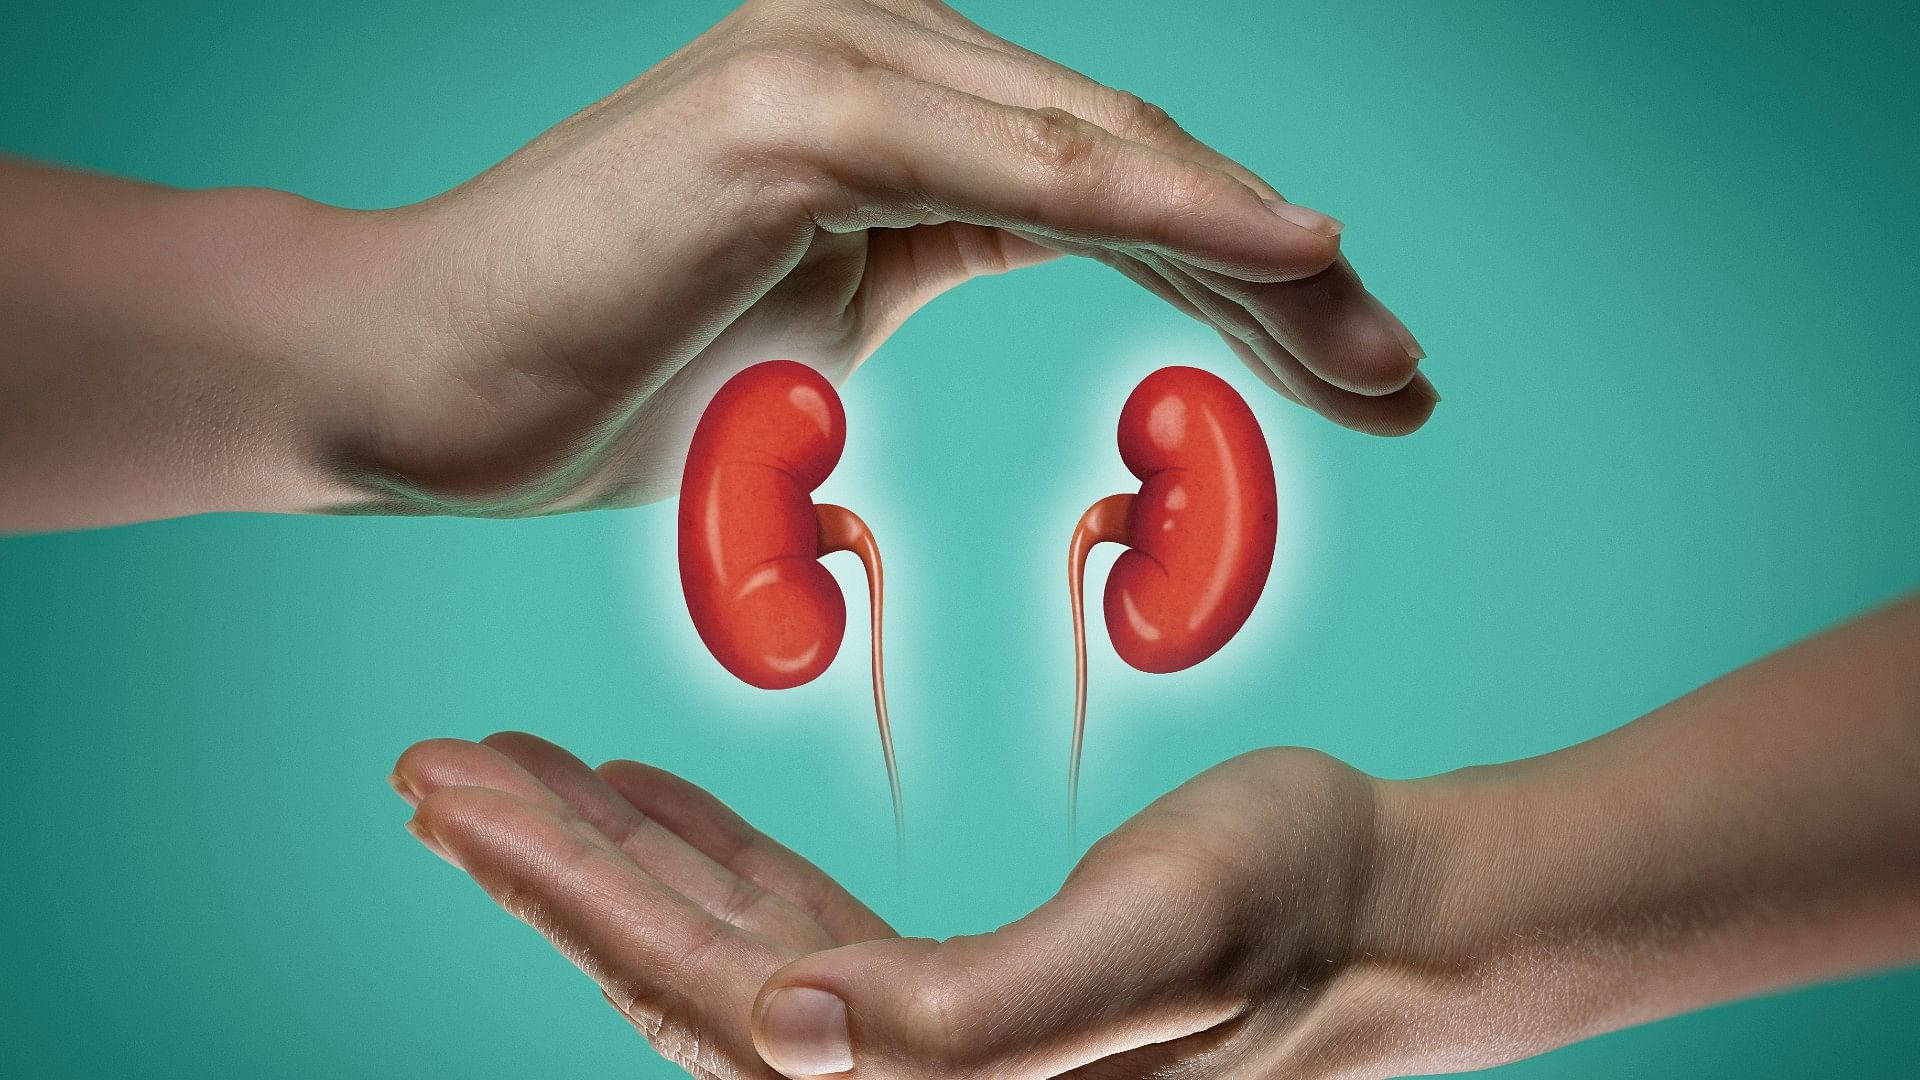 Habits That Harm Kidney Avoid These 5 Bad Habits For A Heathy Kidney